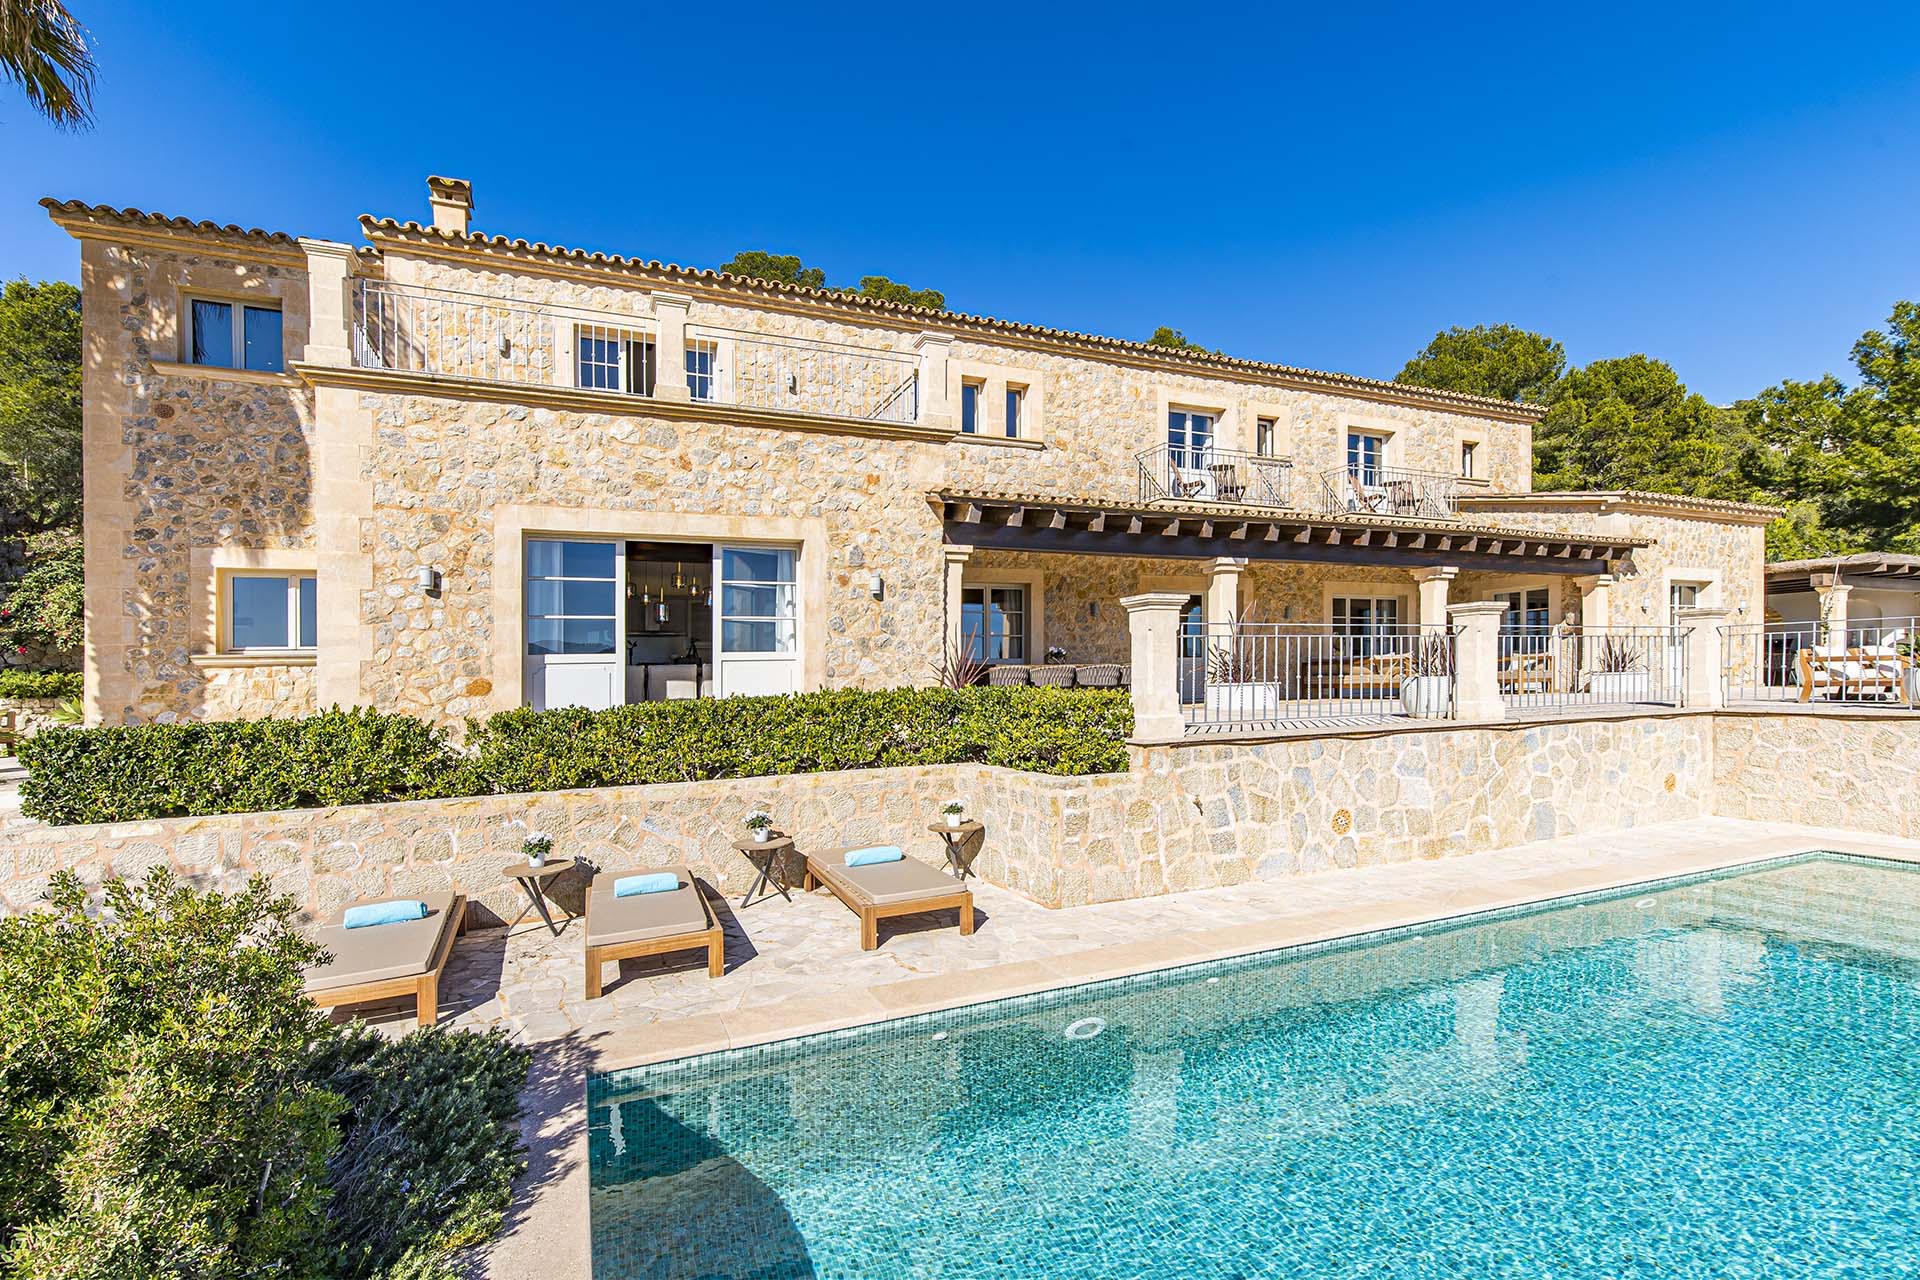 Long-term rental in Mallorca is becoming increasingly popular - the offer ranges from small flats to prestigious villas like here in Andratx